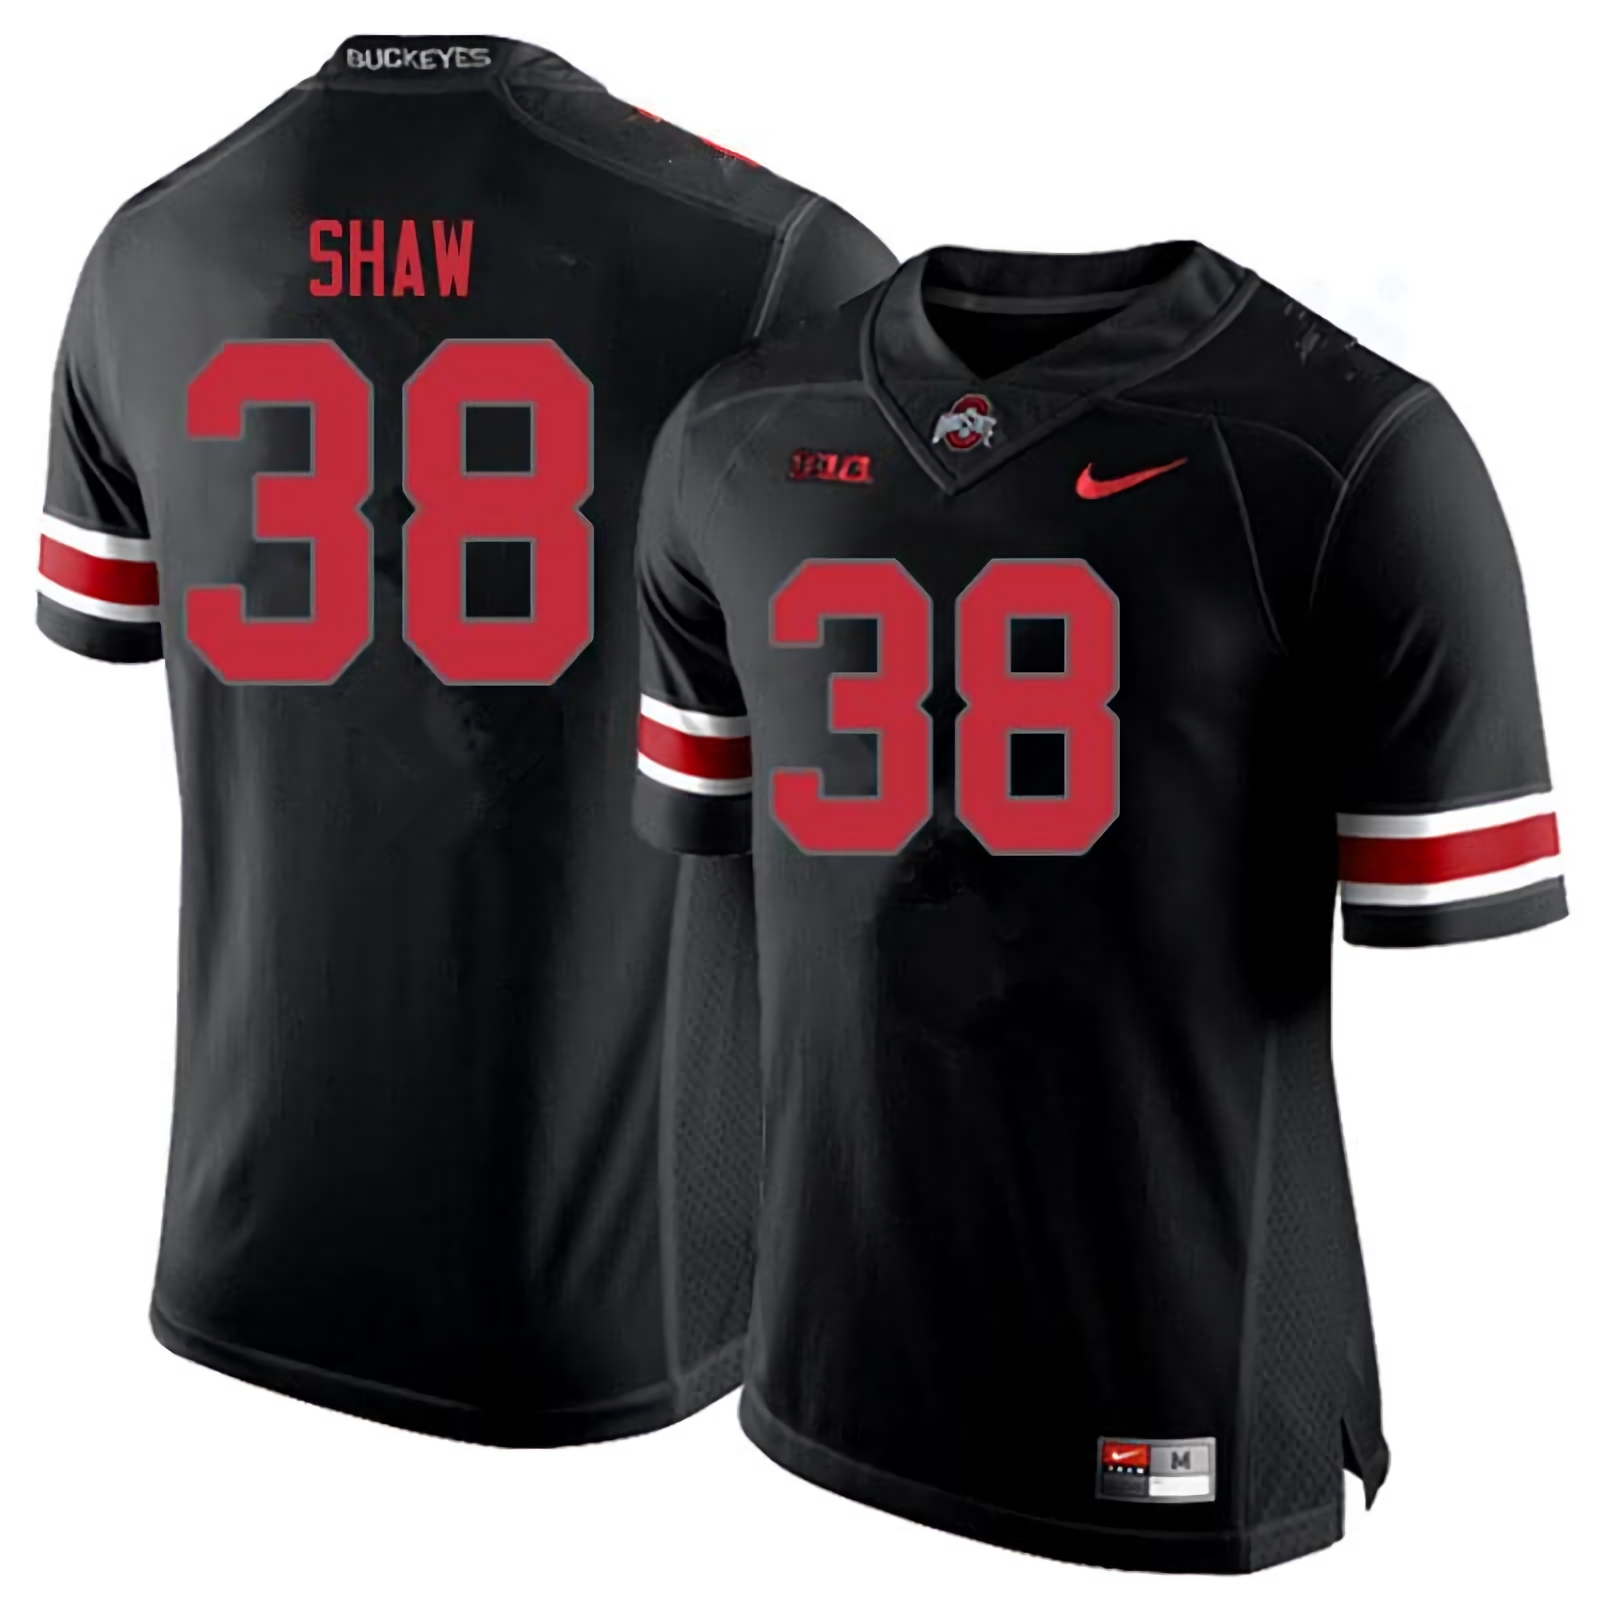 Bryson Shaw Ohio State Buckeyes Men's NCAA #38 Nike Blackout College Stitched Football Jersey HDO3756CY